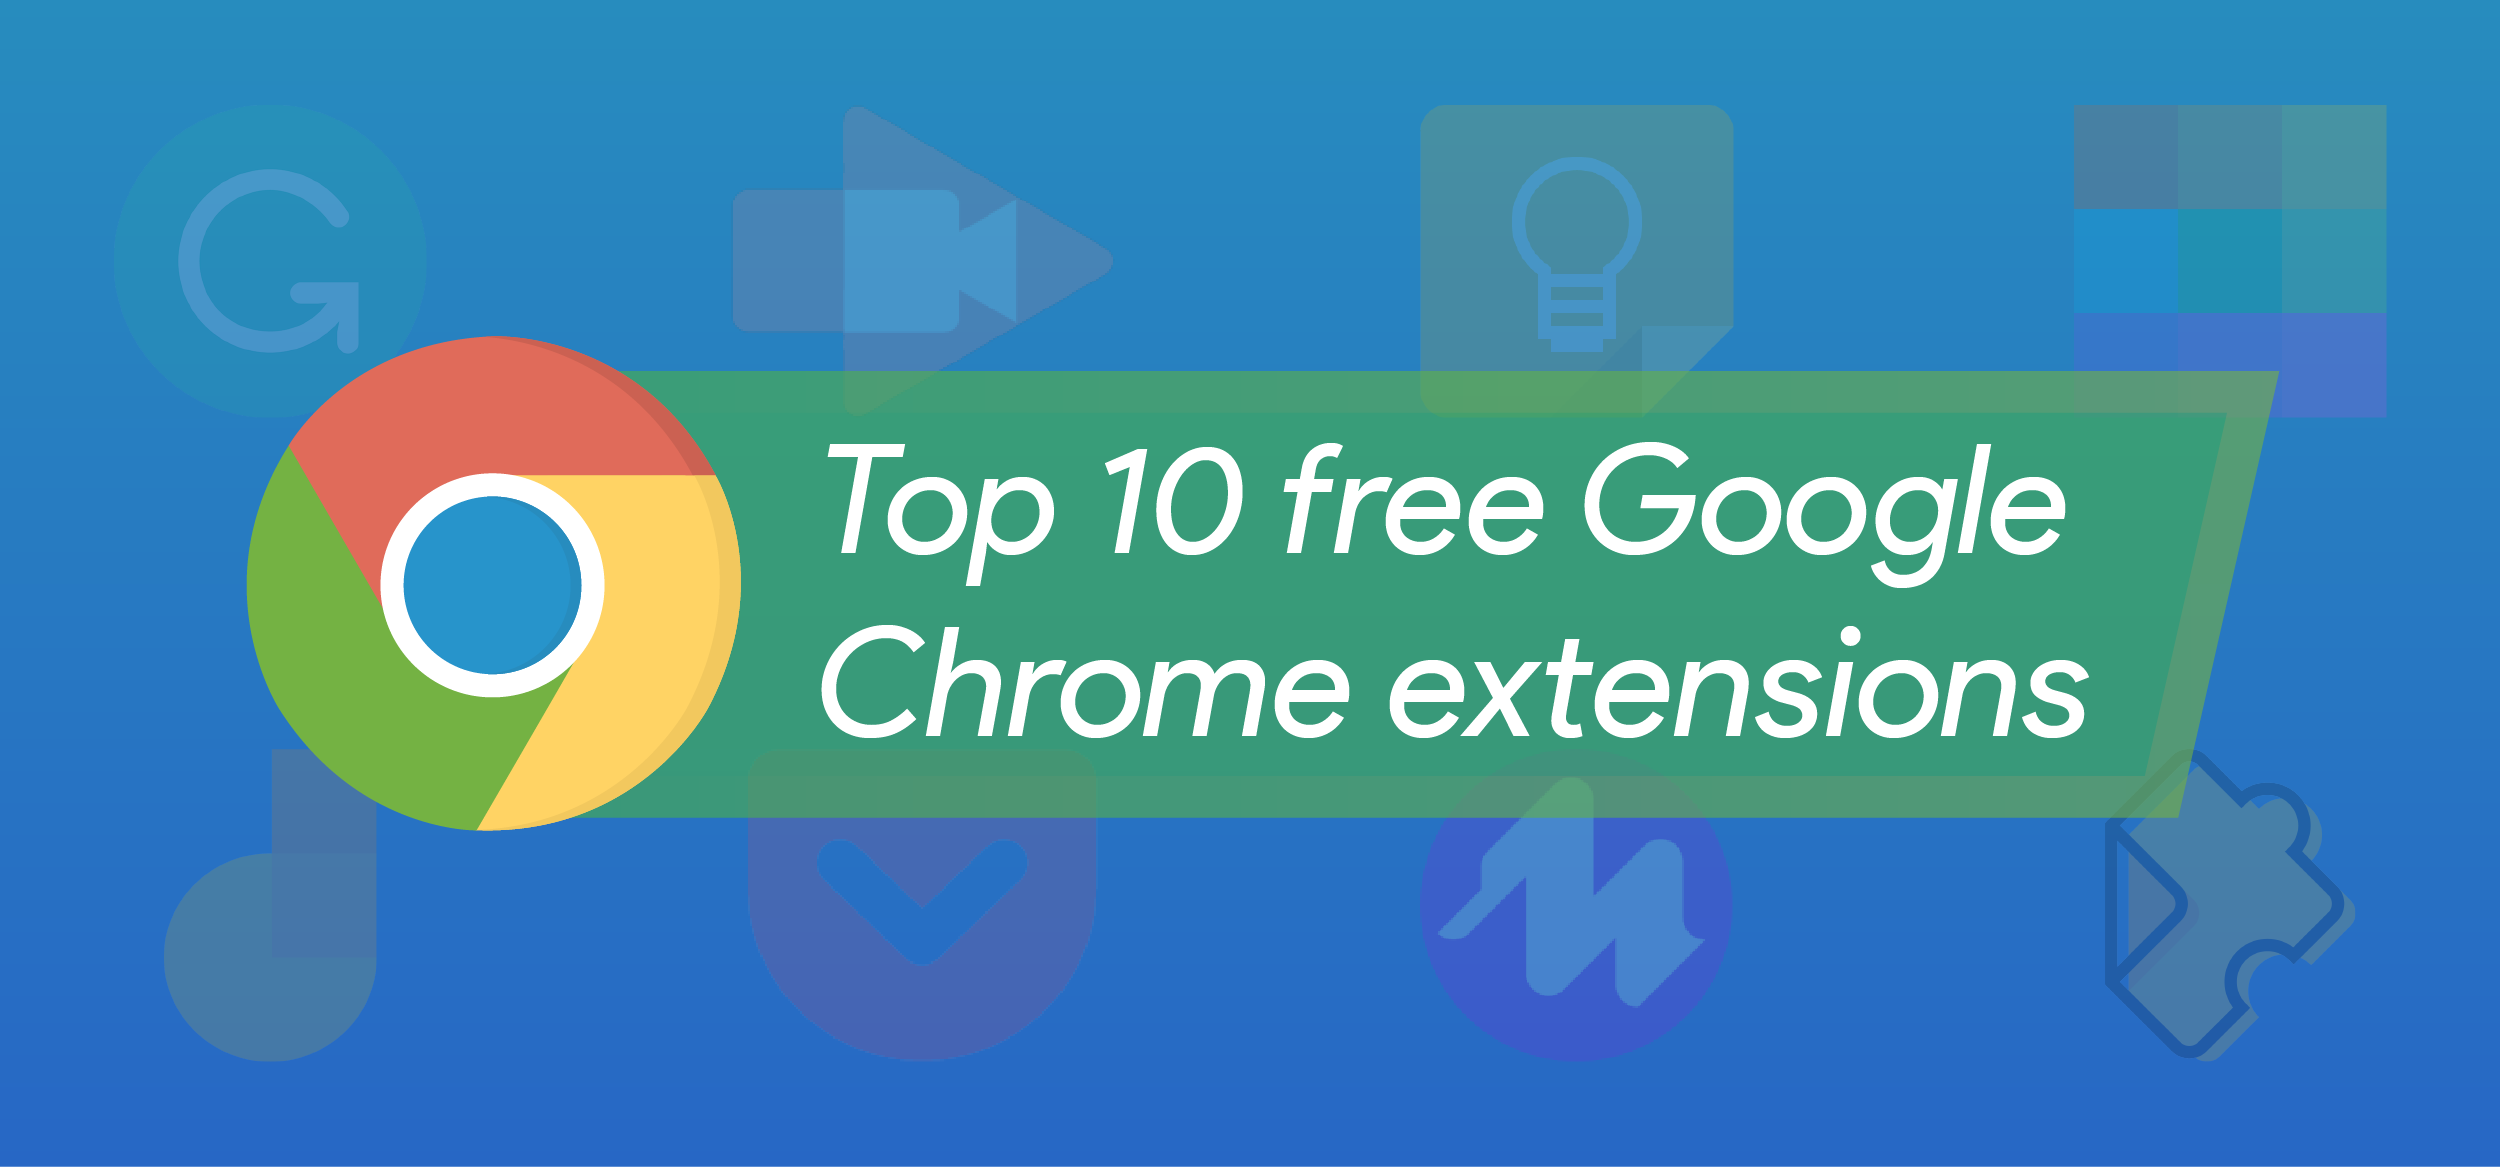 Top 10 Free Google Chrome Extensions Graphic | Hāpara